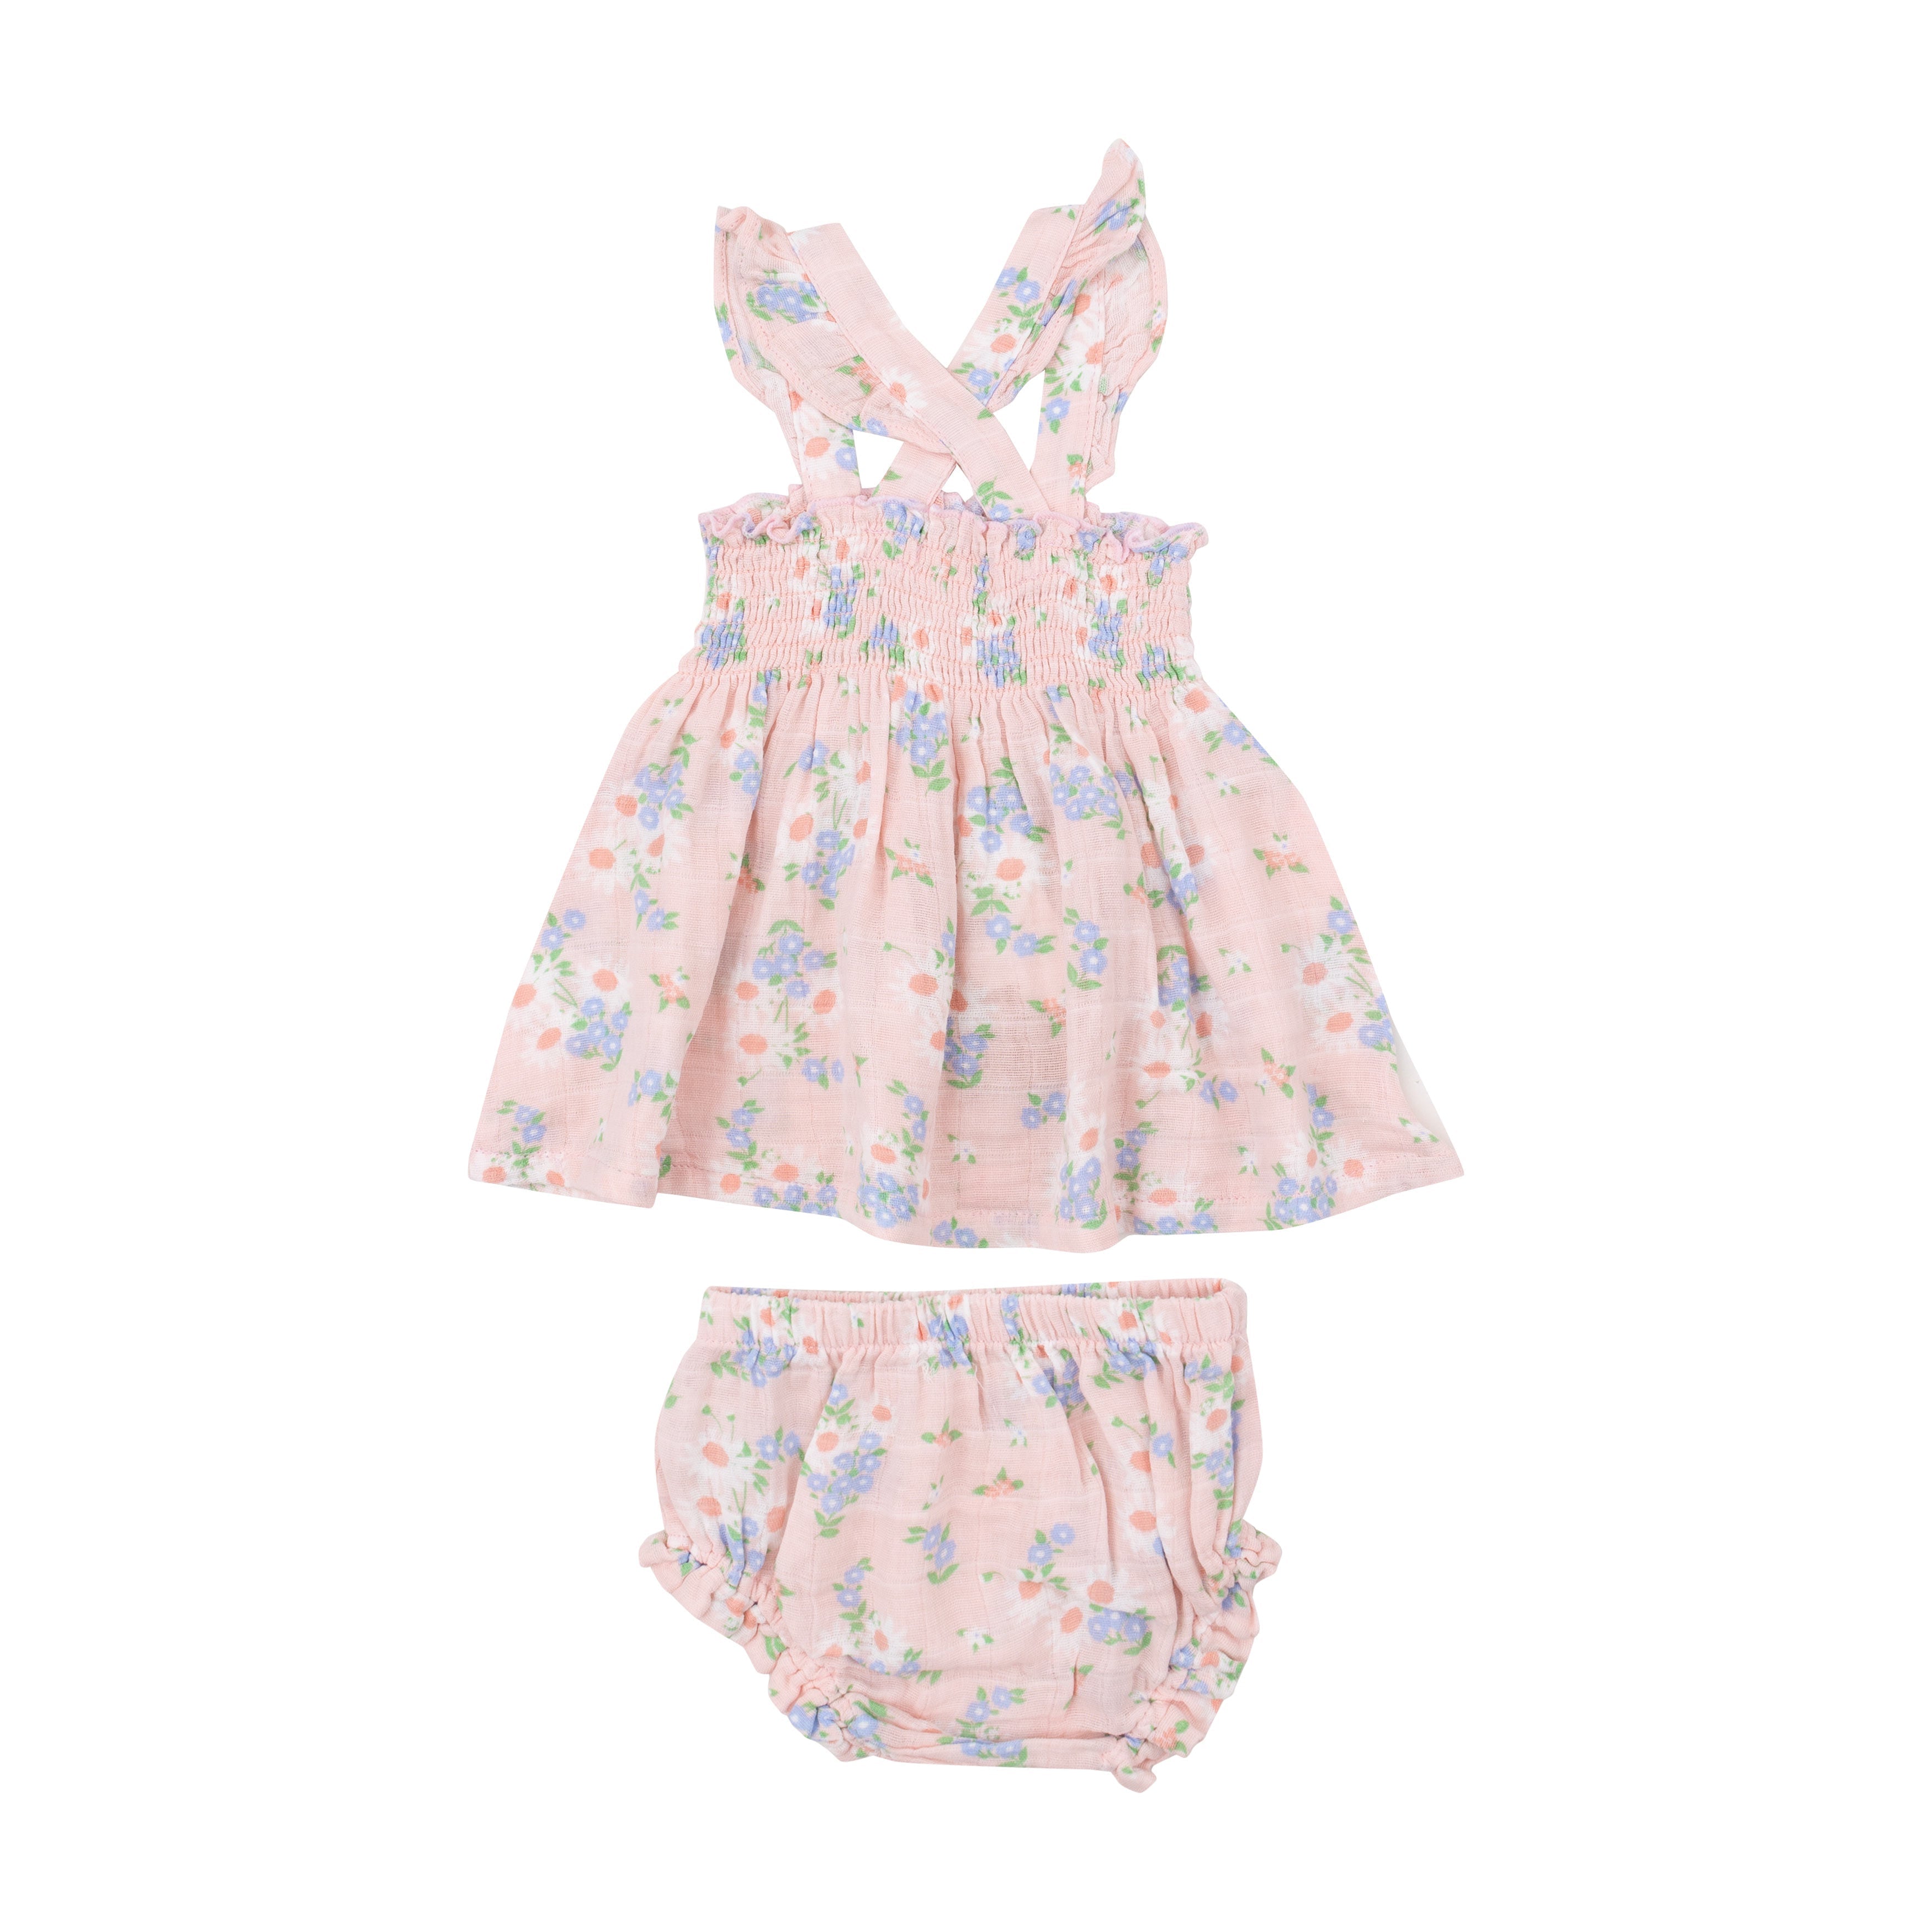 Ruffle Strap Smocked Top And Diaper Cover - Gathering Daisies